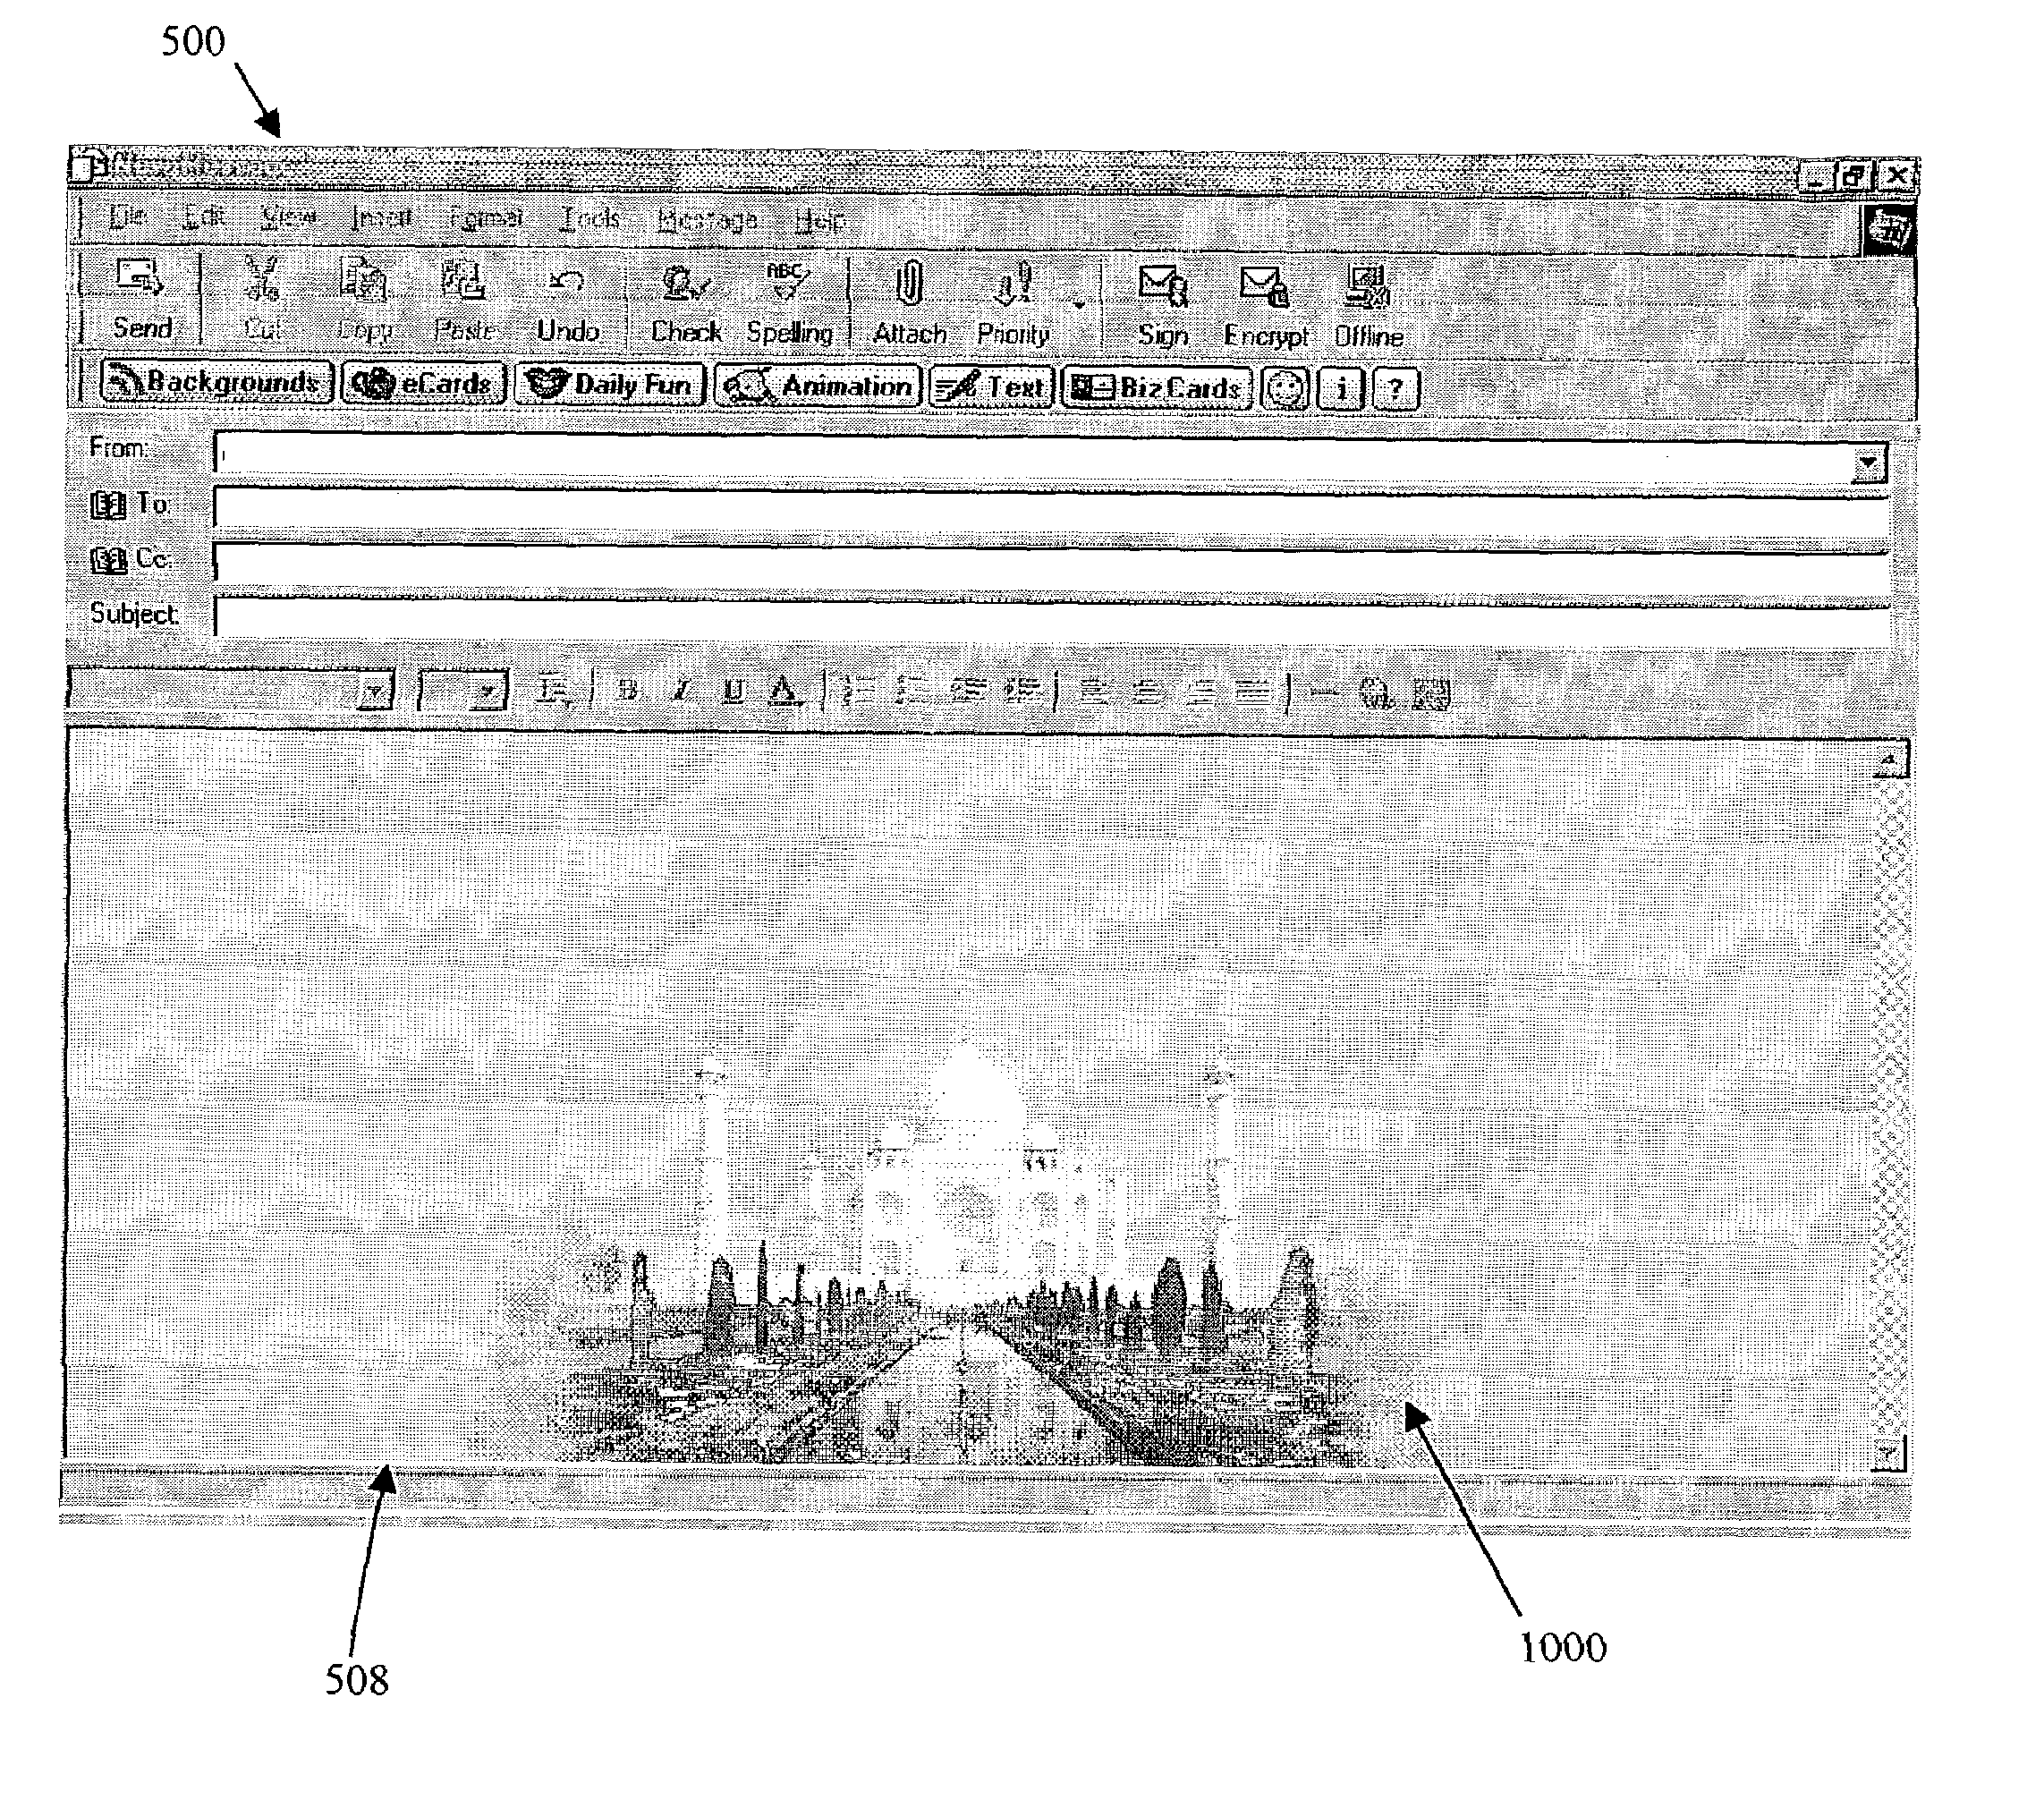 System and method for customizing electronic messages